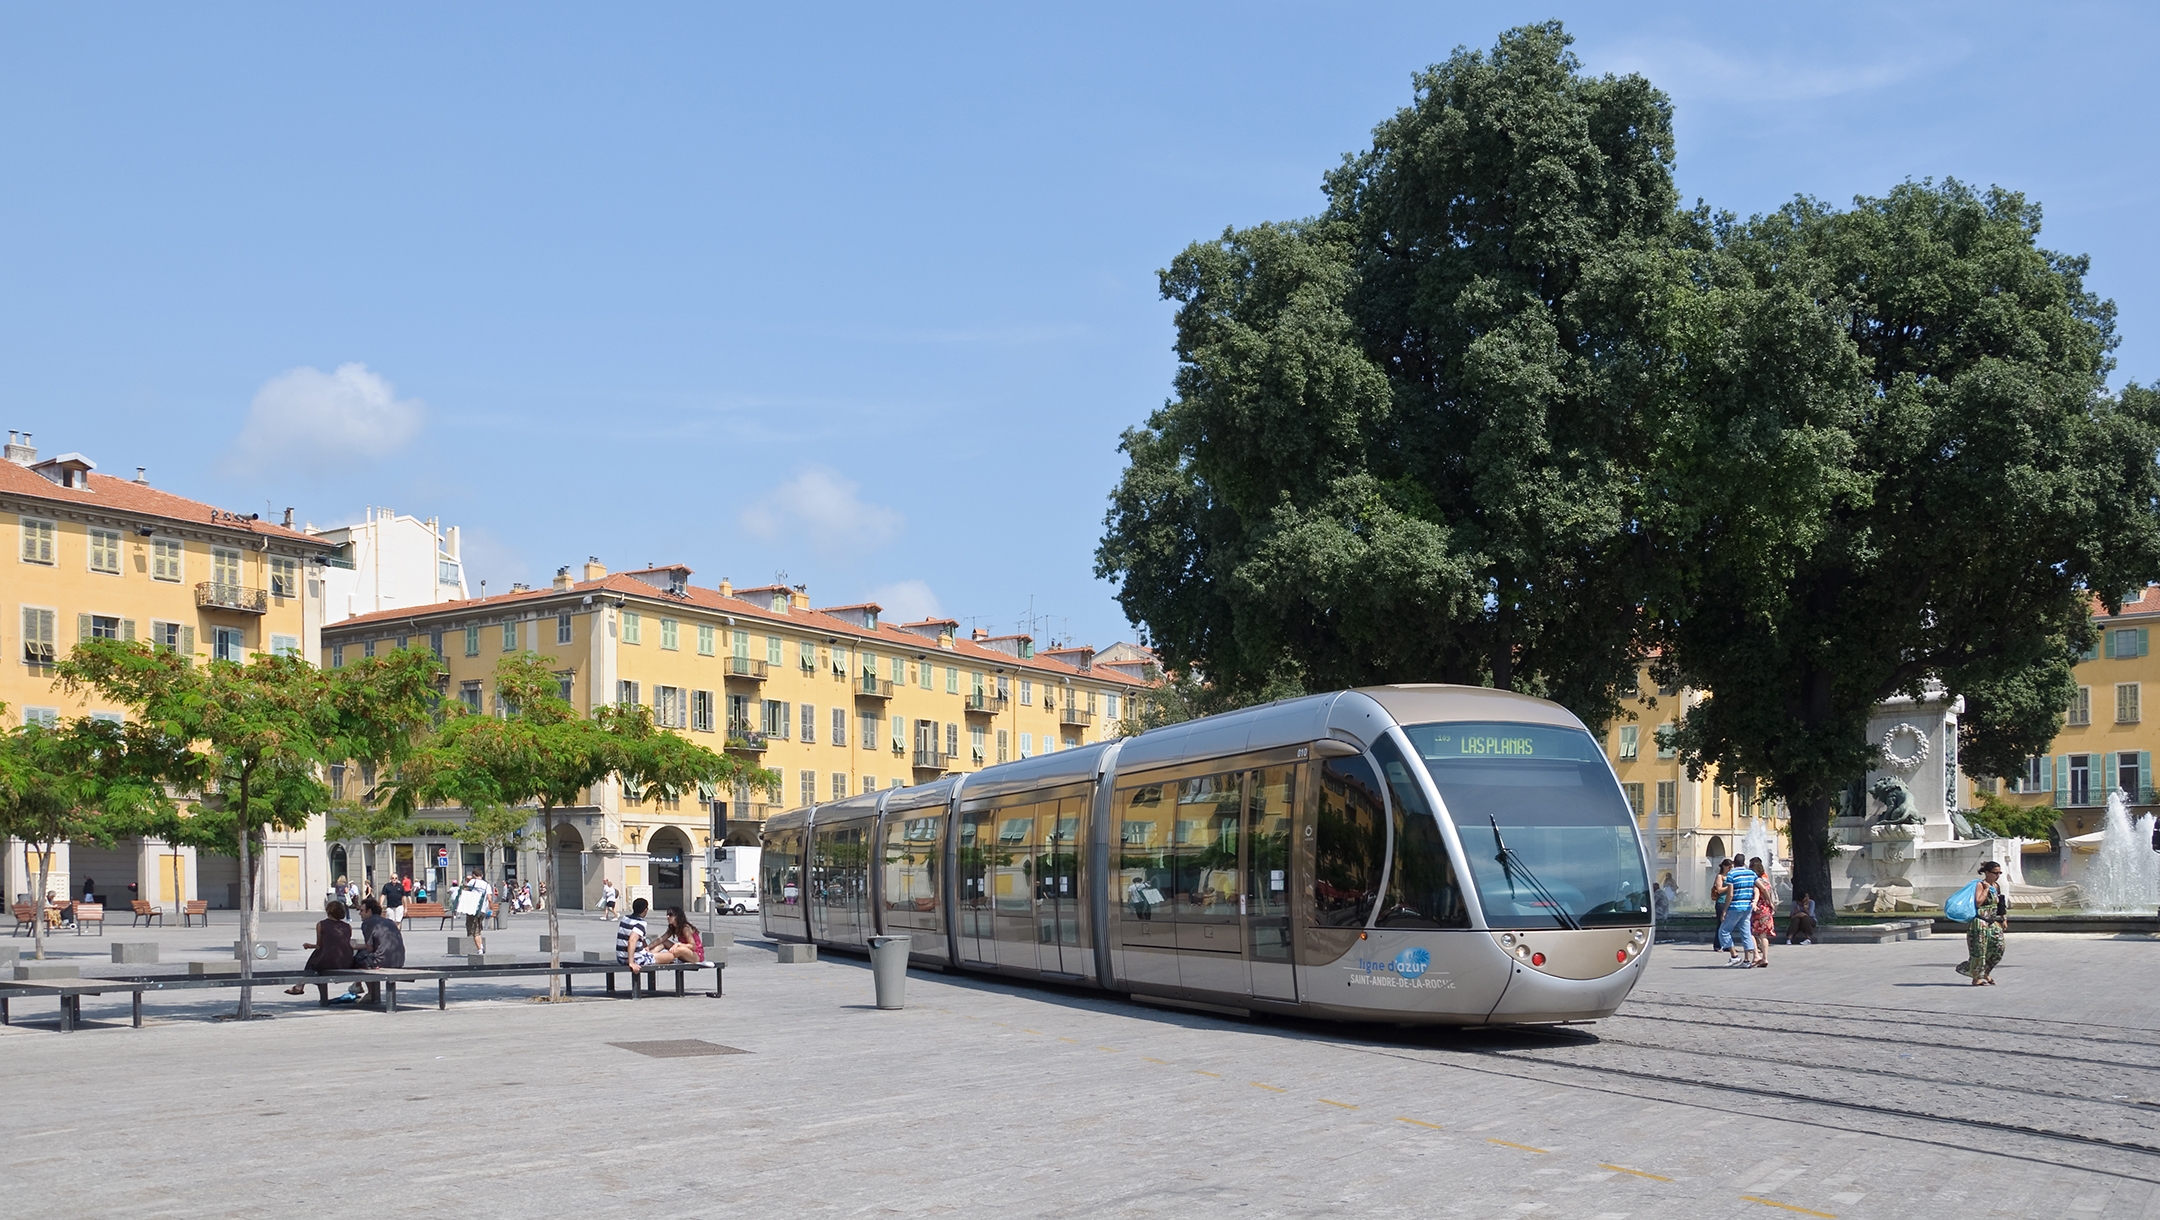 A tram arriving at Garibaldi Square in Nice, France on August 10, 2010. (Myrabella/Wikimedia Commons)